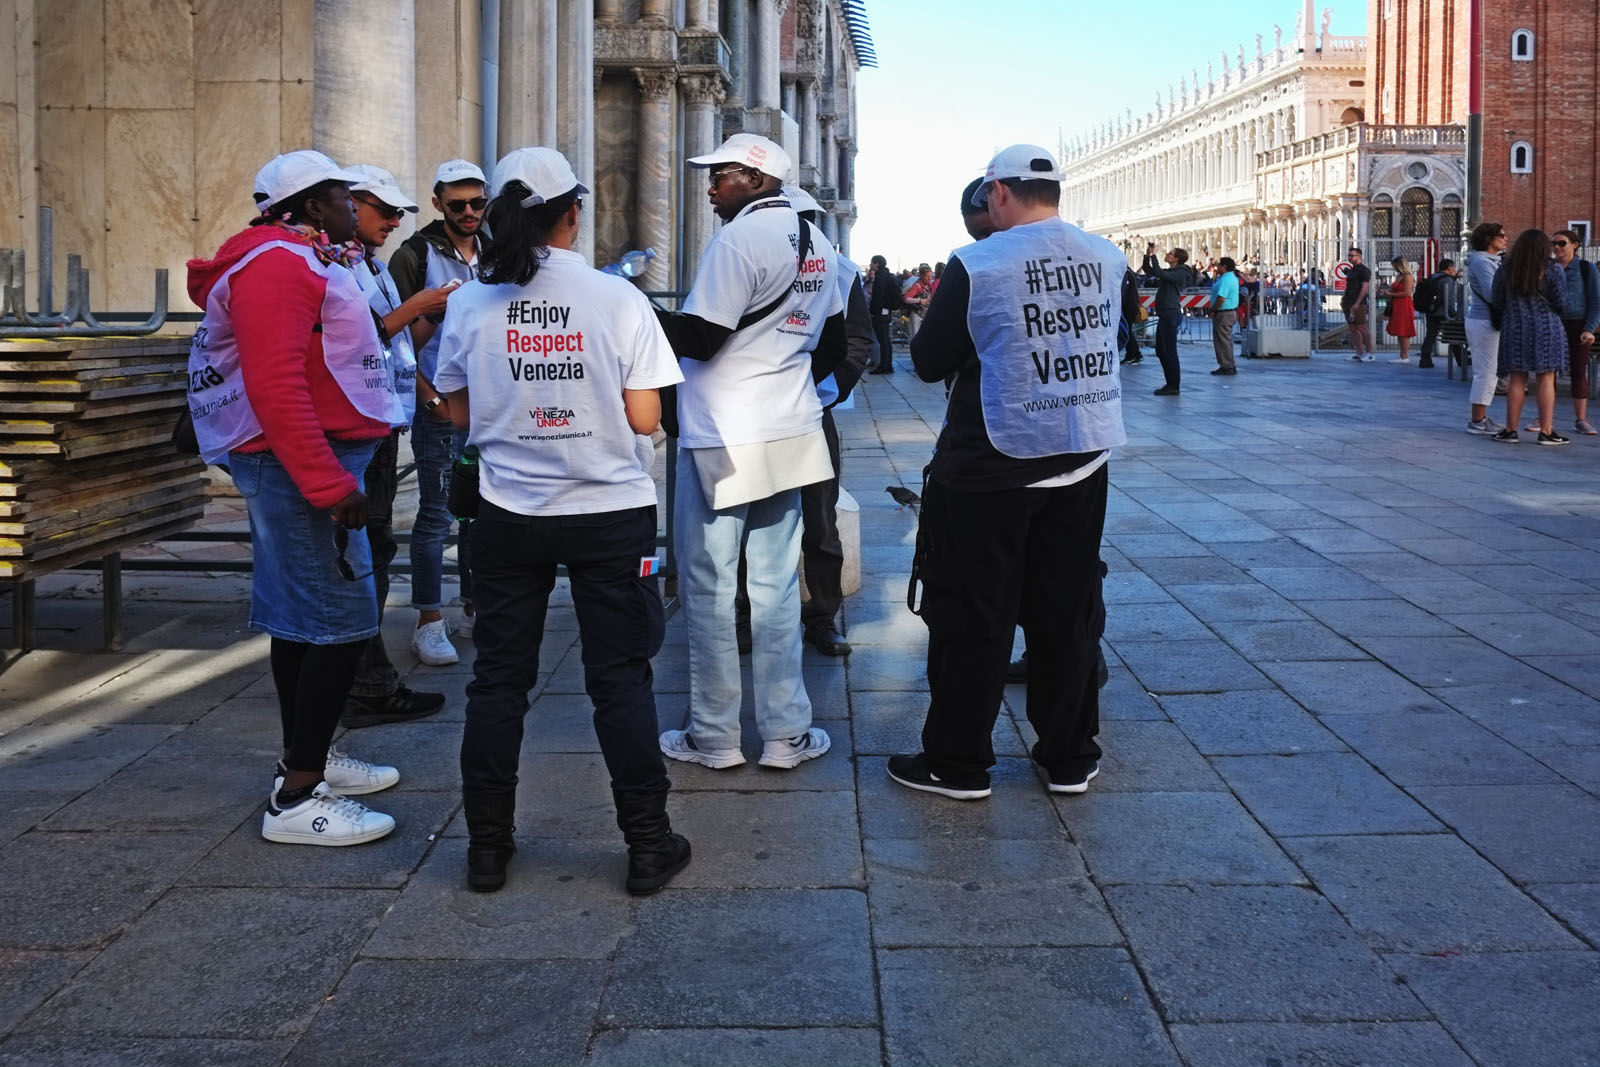 Enjoy Respect Venice, volunteers, Piazza San Marco. Travel photography by Kent Johnson.